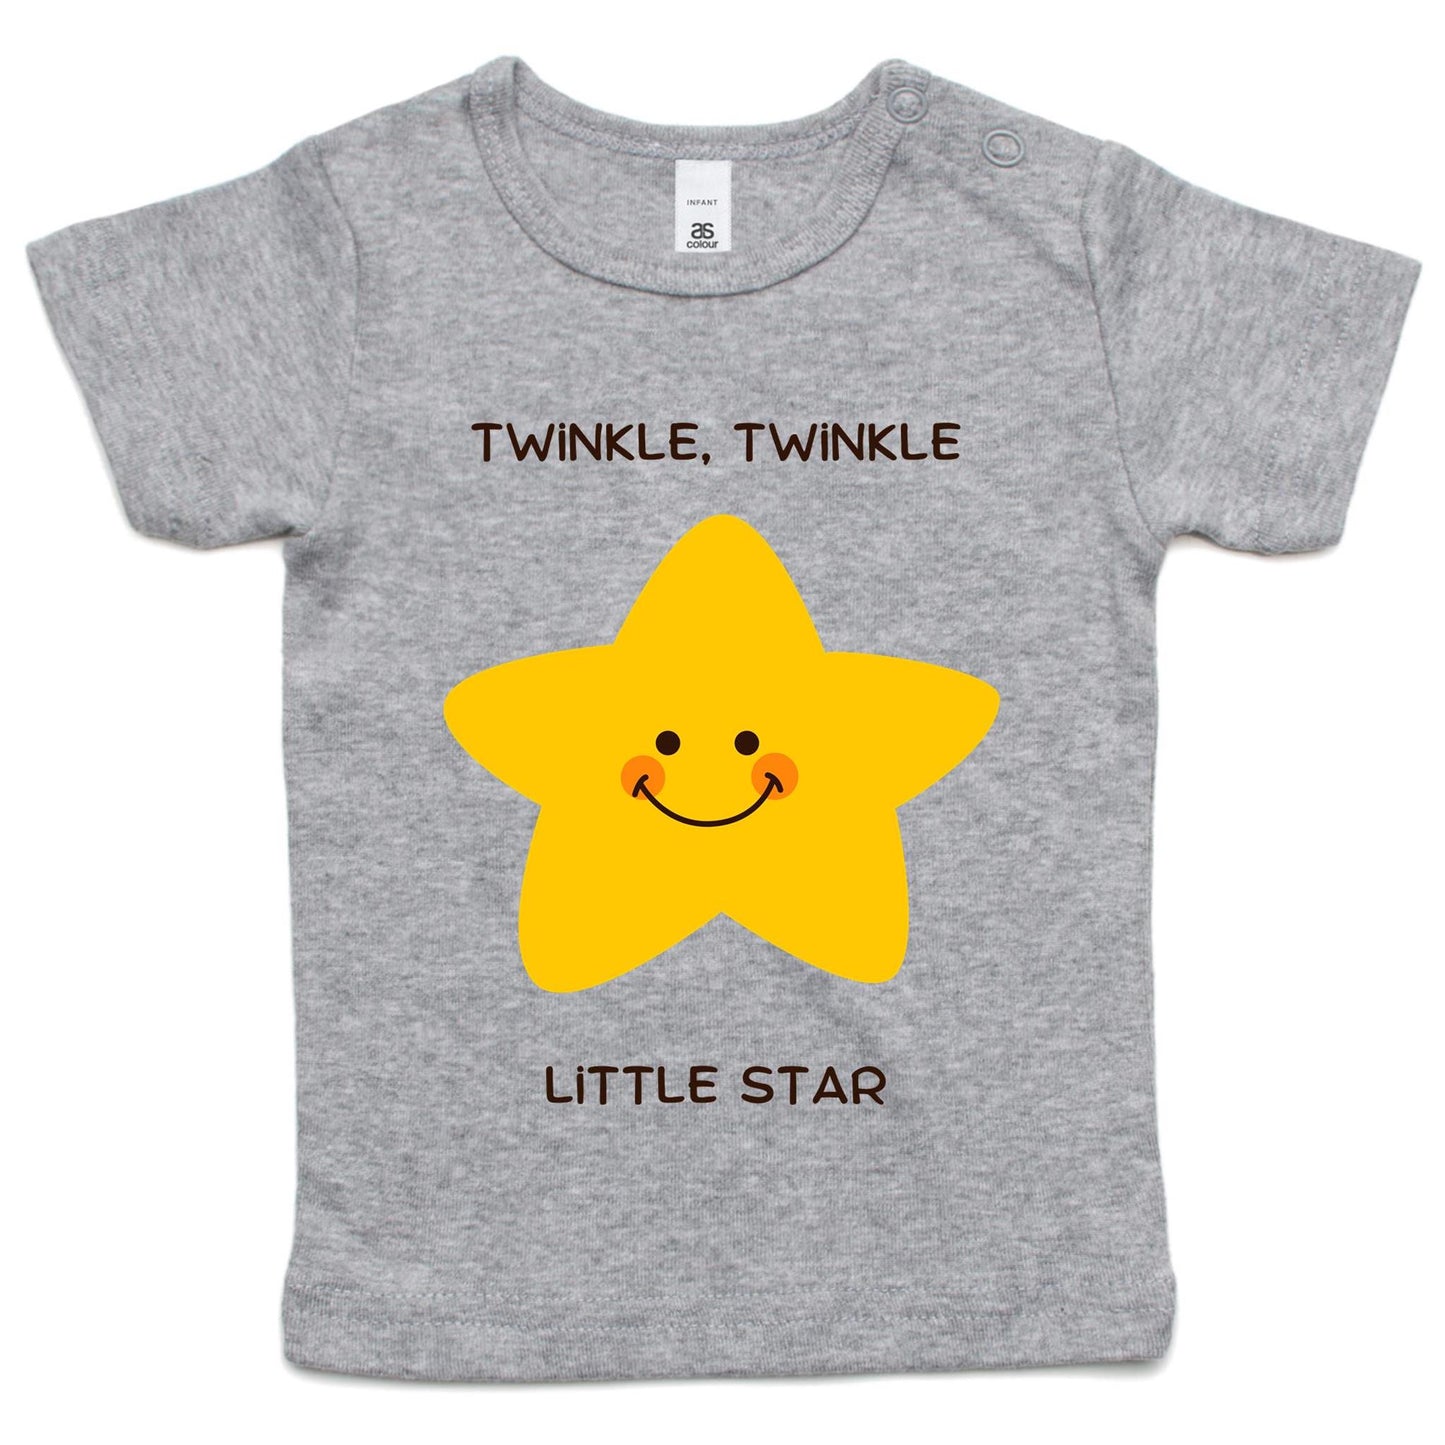 Twinkle Twinkle - Baby T-shirt Grey Marle Baby T-shirt